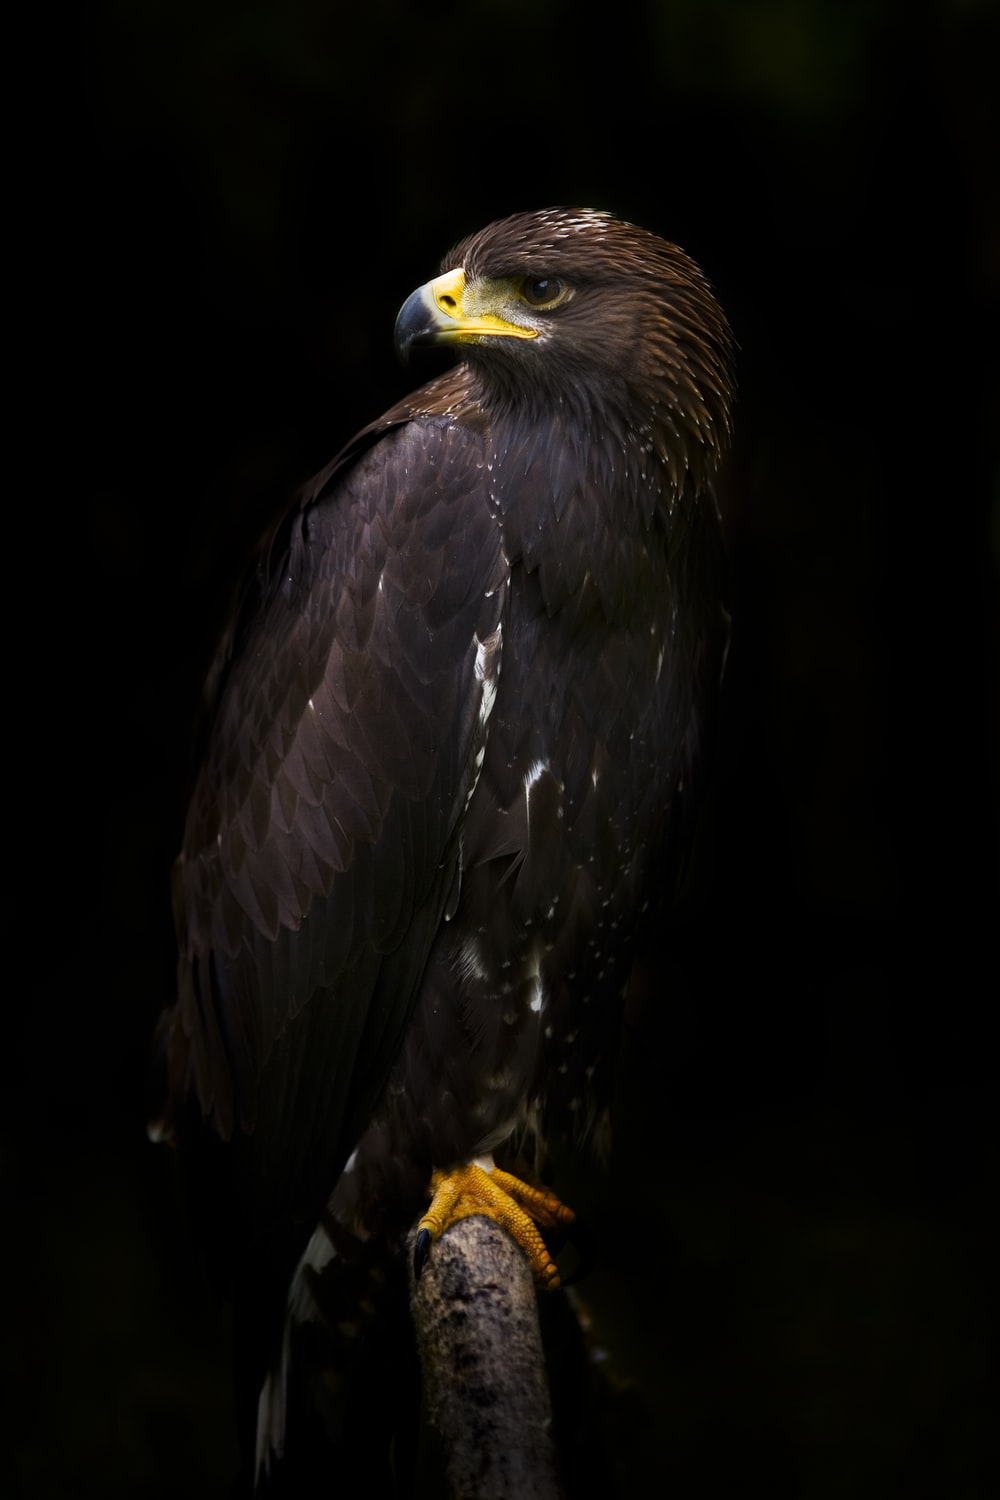 Black Eagle Picture. Download Free Image